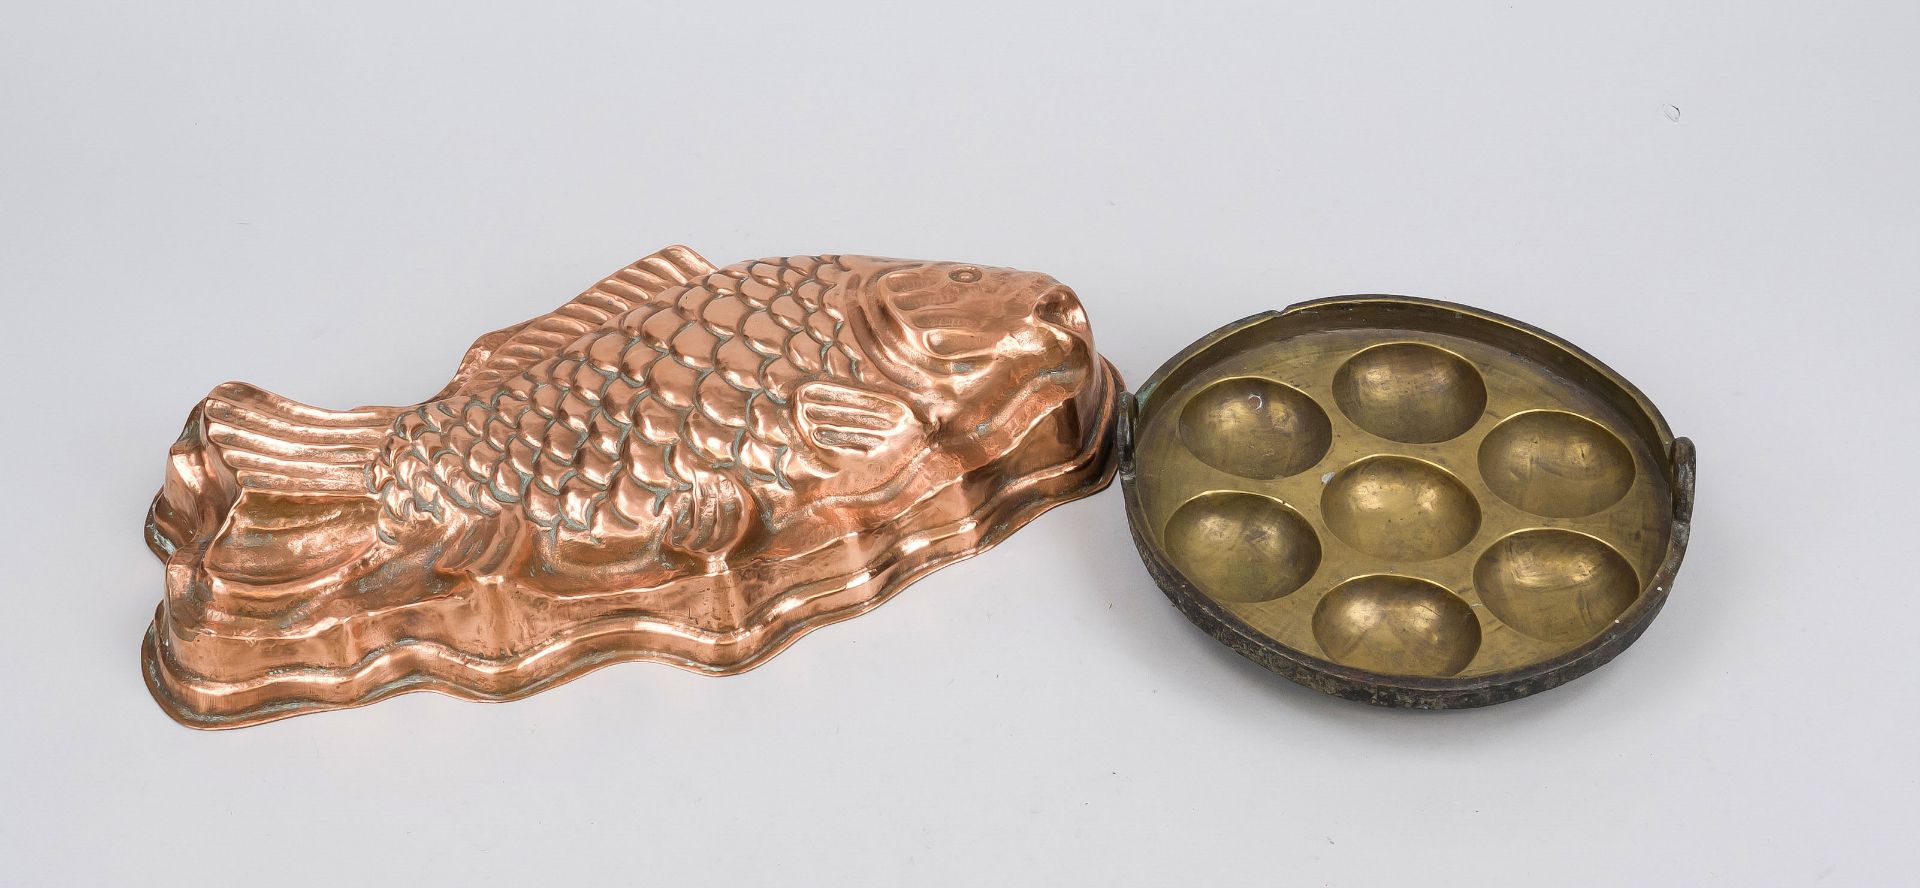 Two baking tins, 19th/20th century, one in the shape of a fish, copper, tinned inside, with